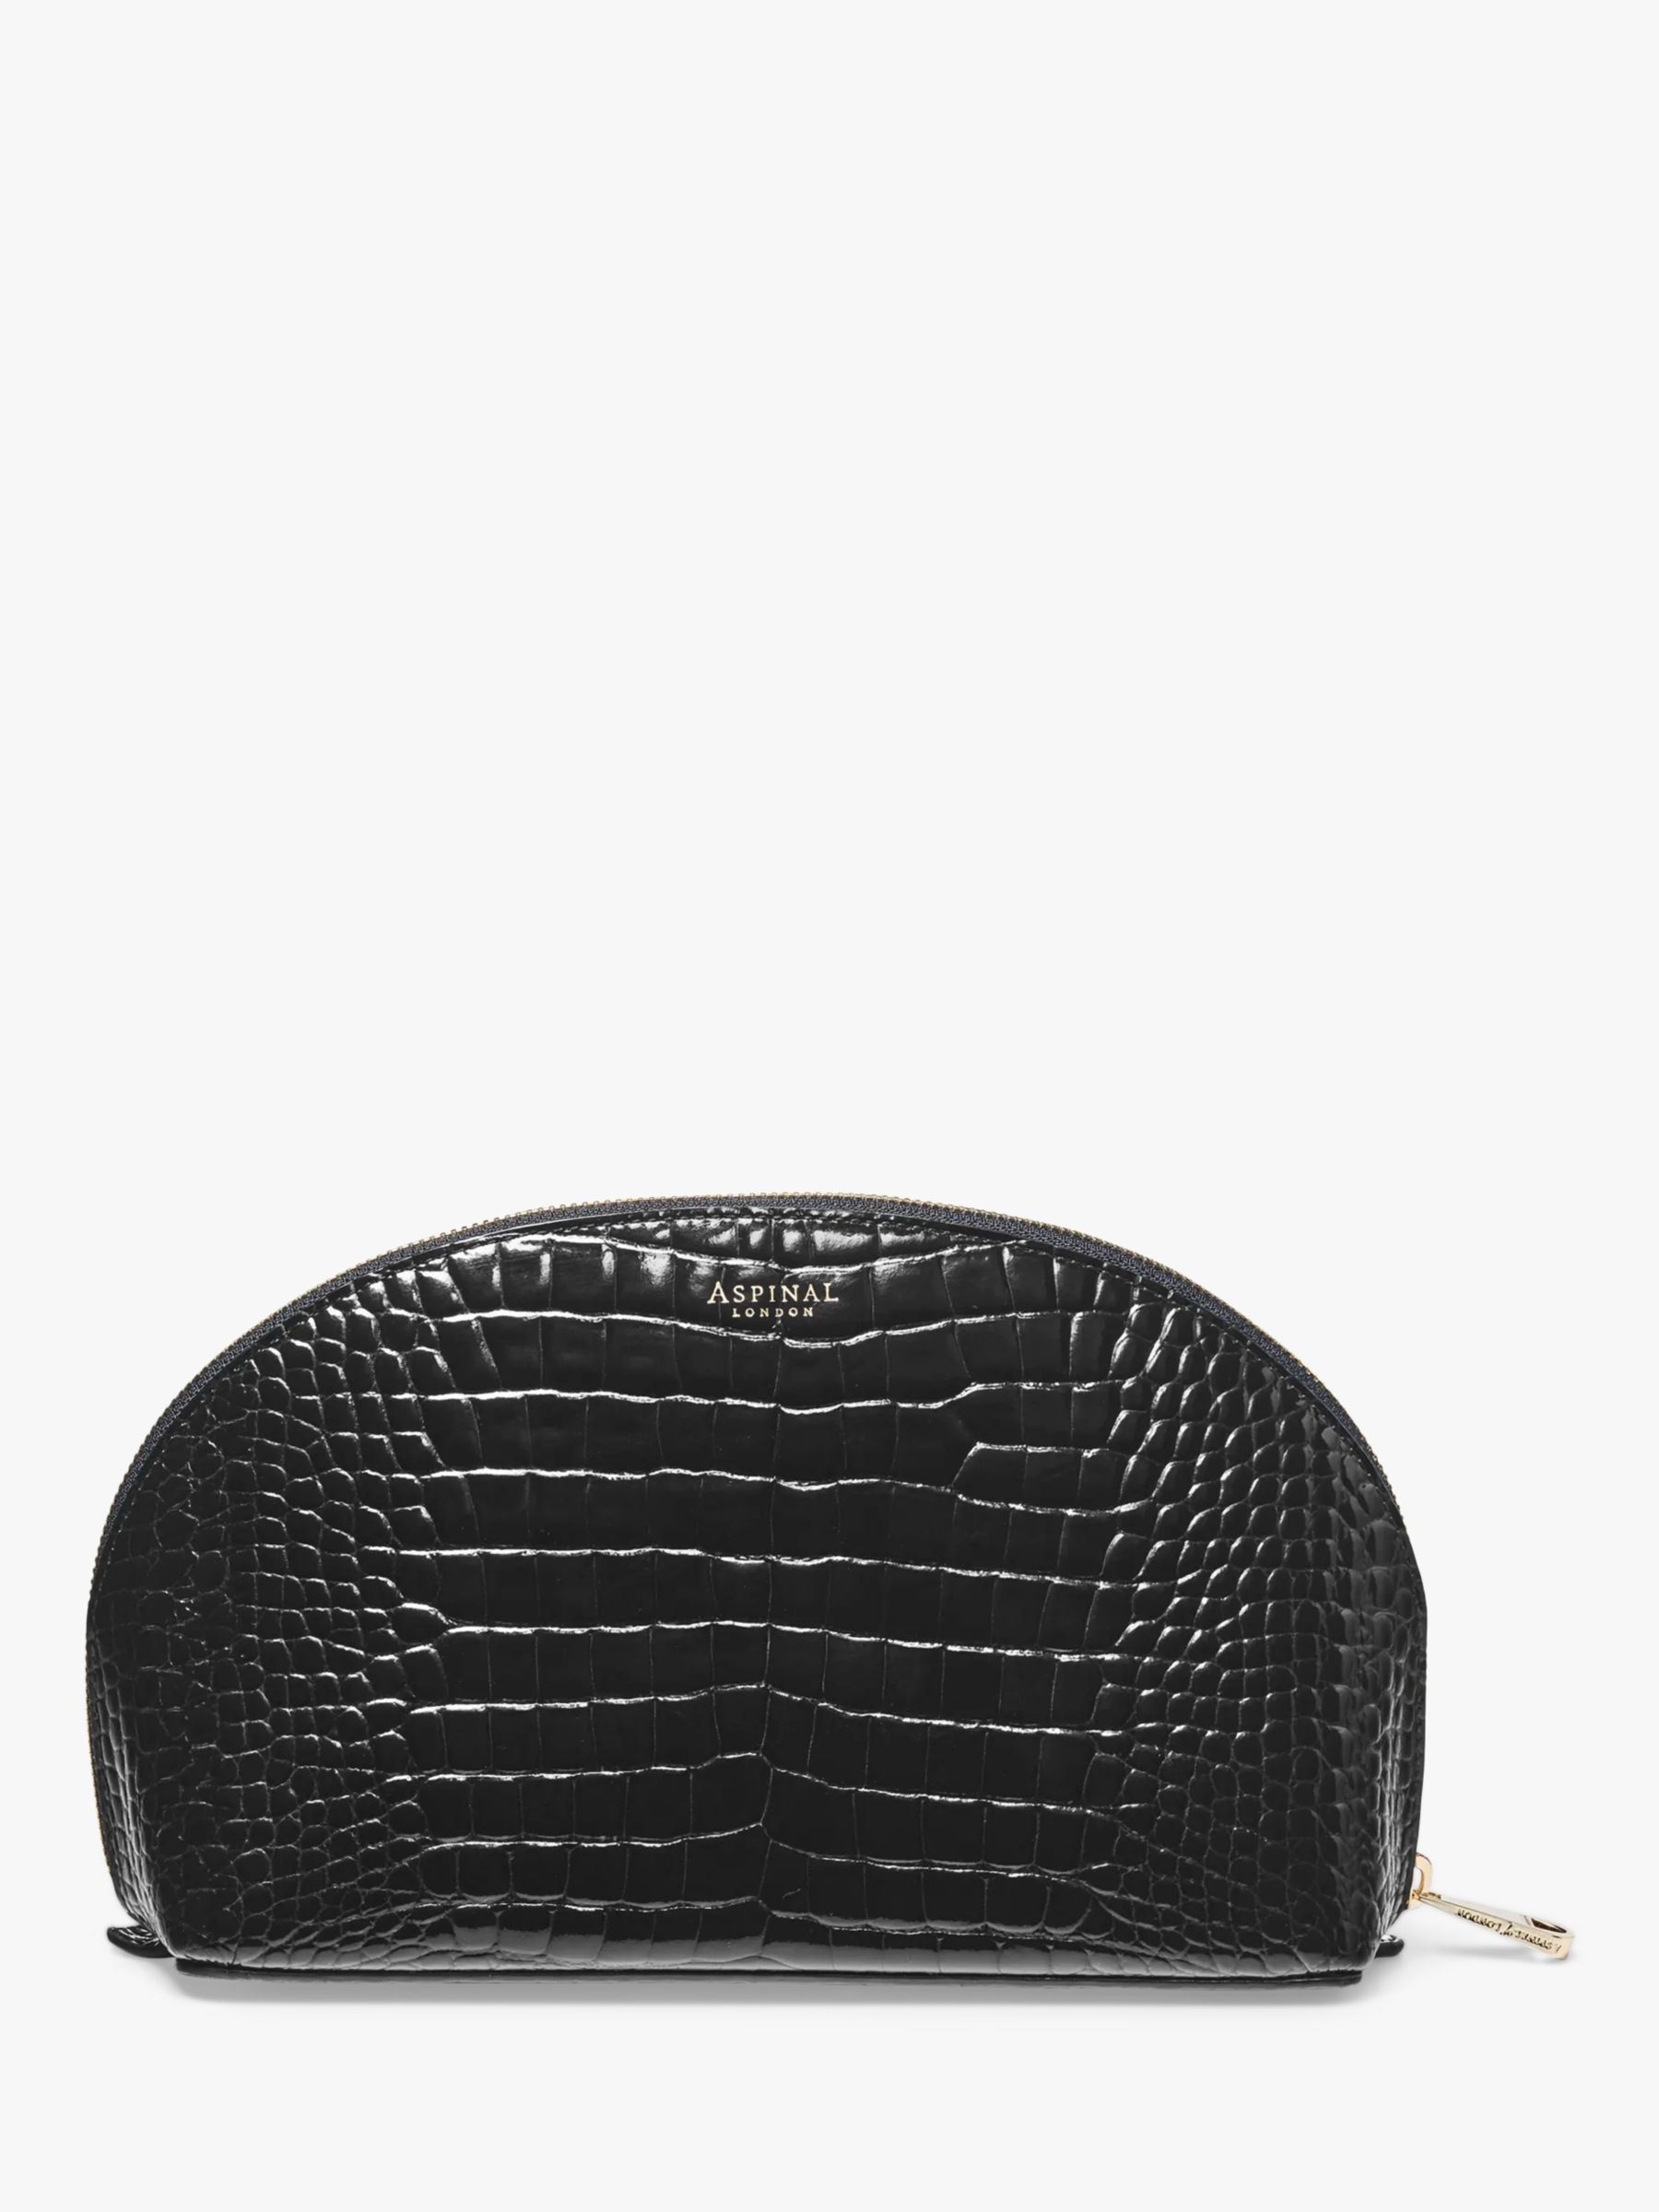 Aspinal of London Large Croc Effect Leather Cosmetic Case, Black 2